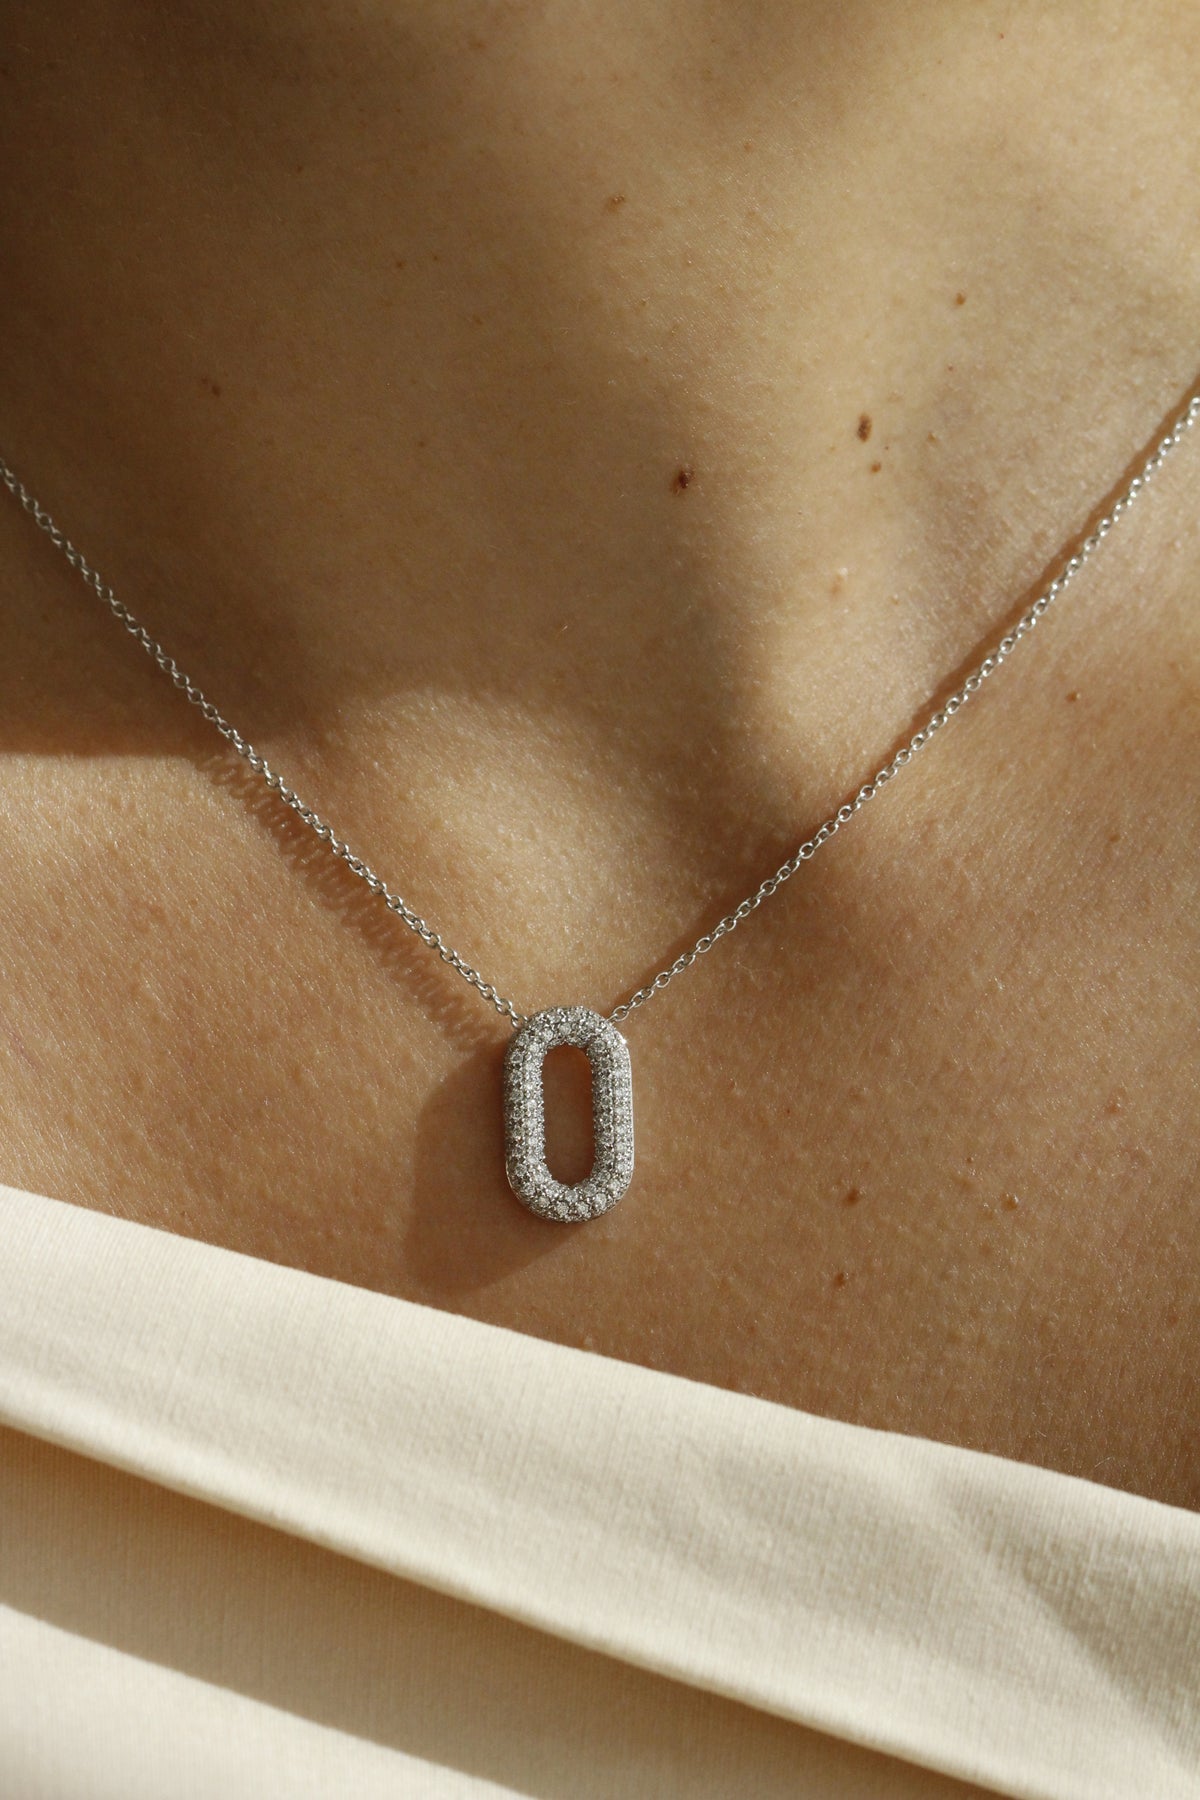 Blackberry Necklace in 18k White Gold with Diamonds